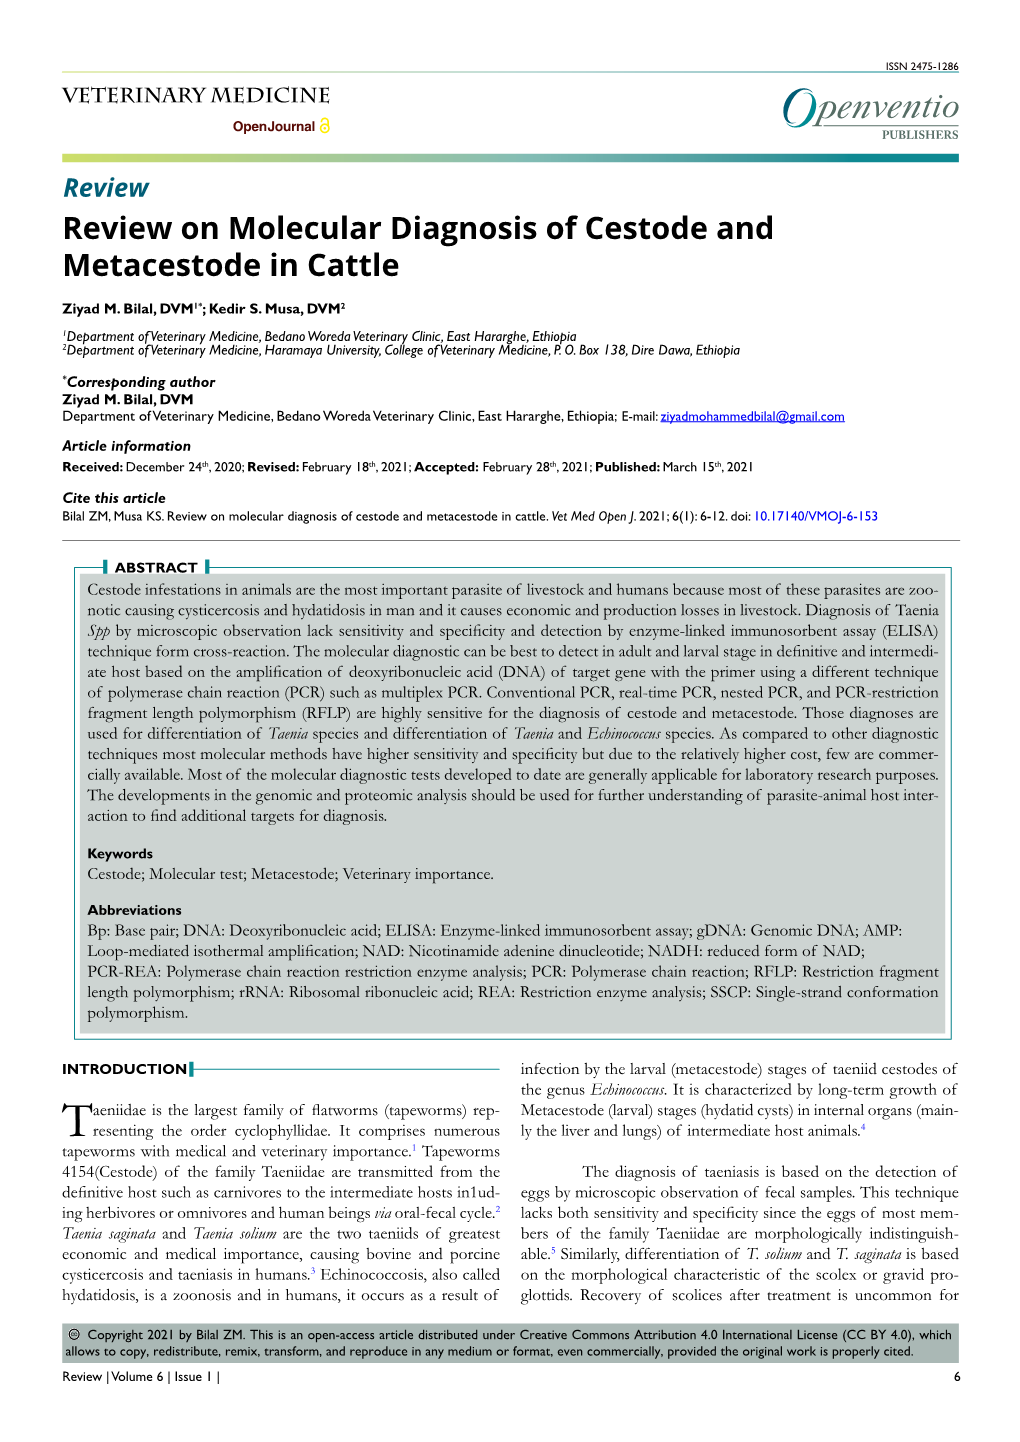 Review on Molecular Diagnosis of Cestode and Metacestode in Cattle